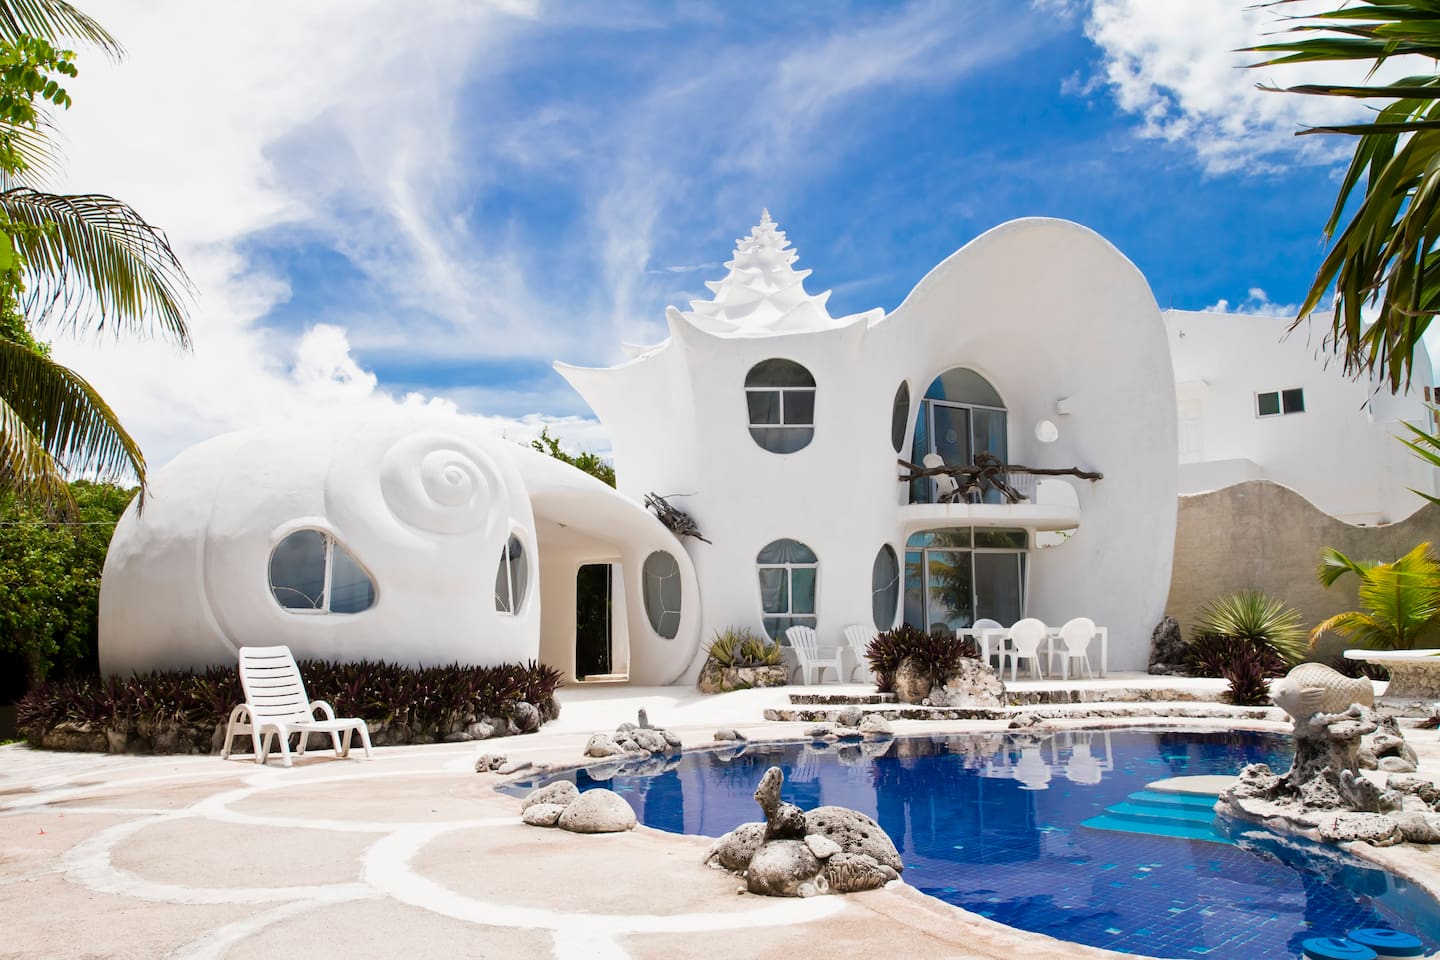 The Seashell House | 30 Marvelously Beautiful Airbnbs Around the World